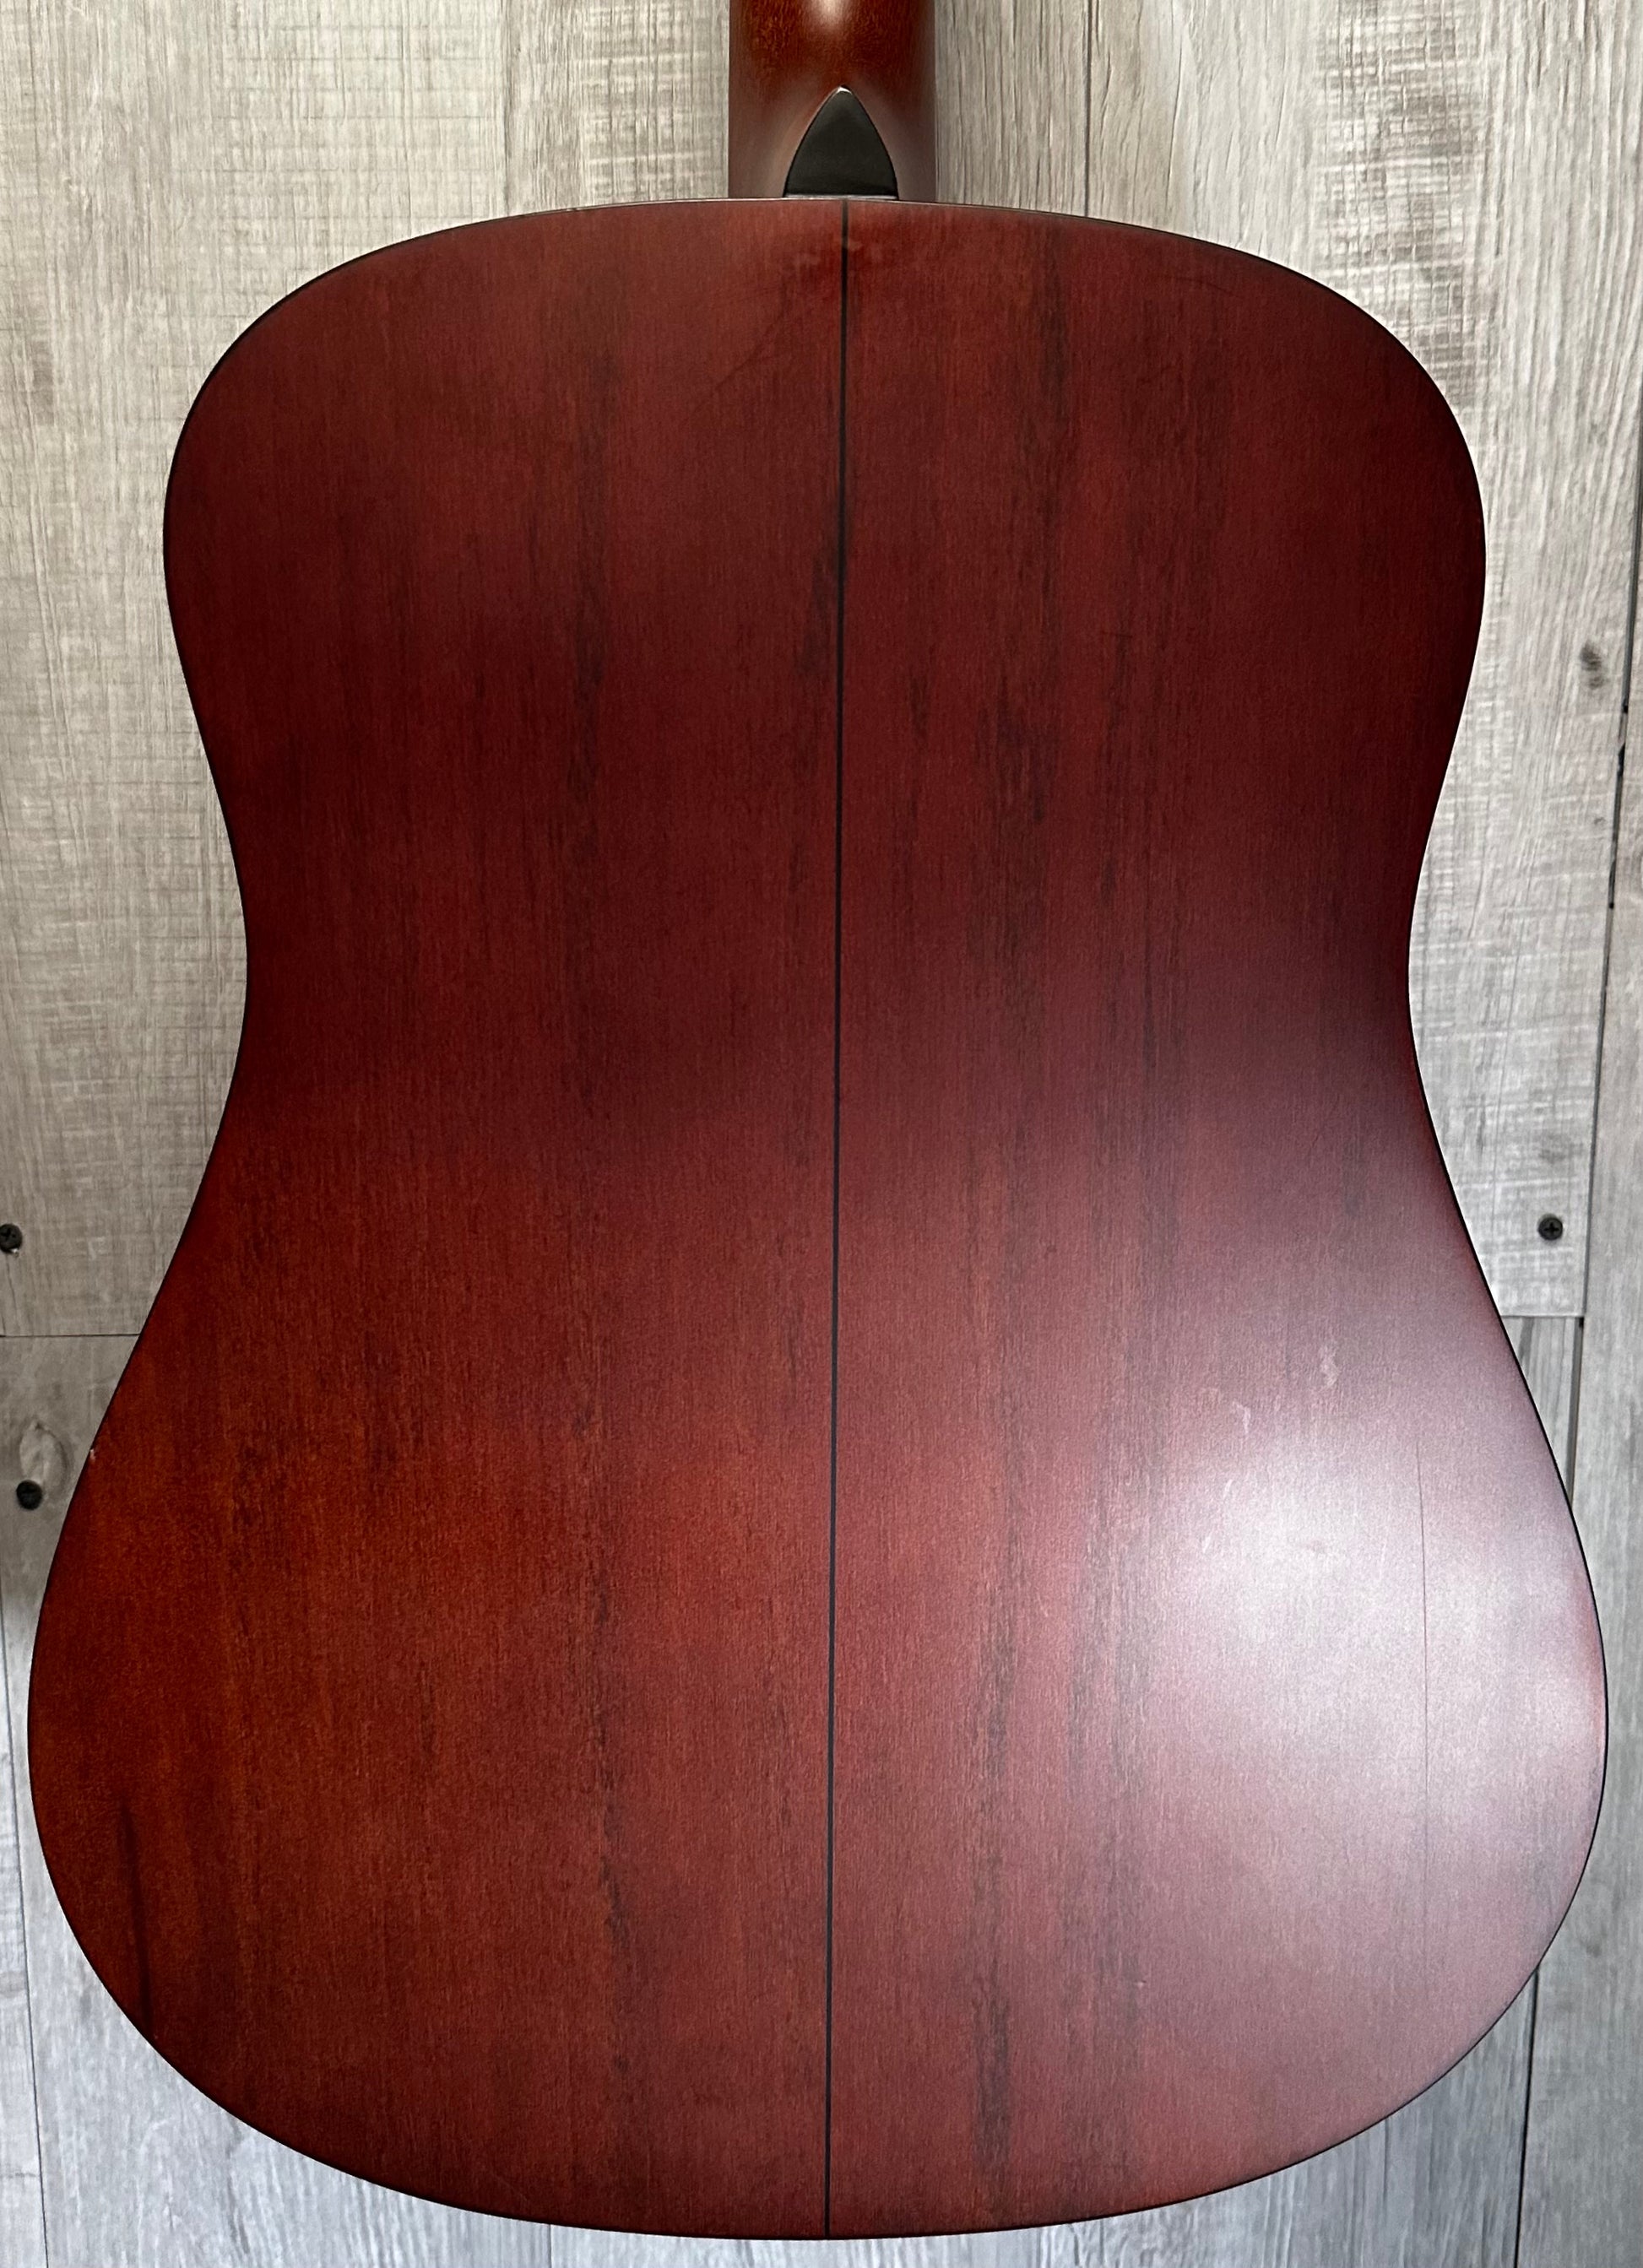 Back view of Used Jasmine Acoustic Natural 